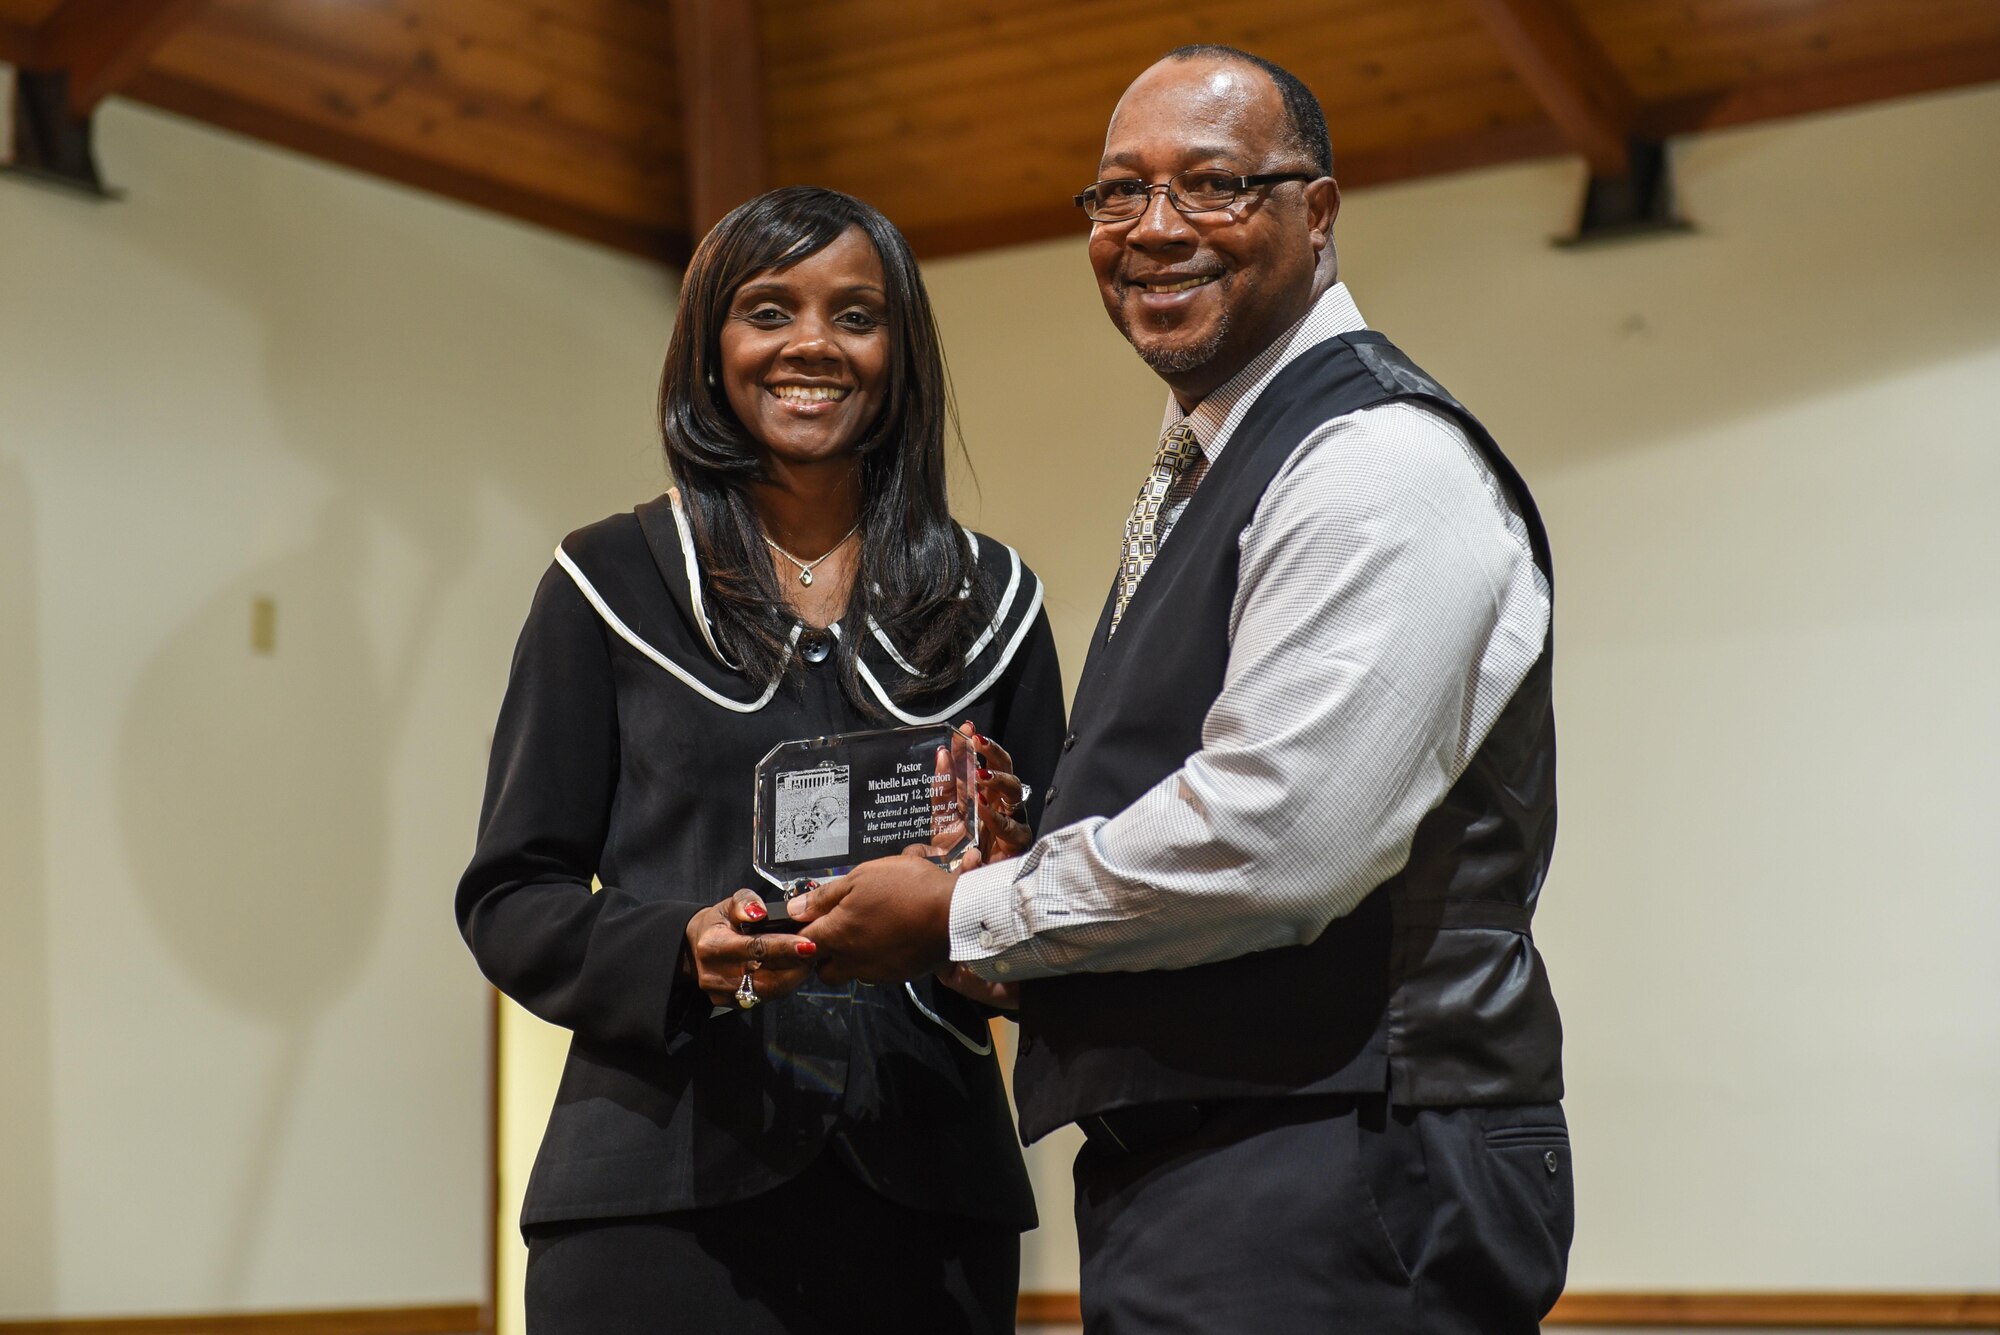 Chaplain (Maj.) Michelle Law-Gordon, staff chaplain with Air Force Reserve Command, is presented a gift from John Armour, chairman of Hurlburt Field’s African-American Heritage Month committee, during the annual Martin Luther King Jr. Commemorative Service at the Hurlburt Field Chapel, Jan. 12, 2017. Law-Gordon was the guest speaker for the event and referred to Martin Luther King Jr. Day as a day on, not a day off. (U.S. Air Force photo by Senior Airman Jeff Parkinson)